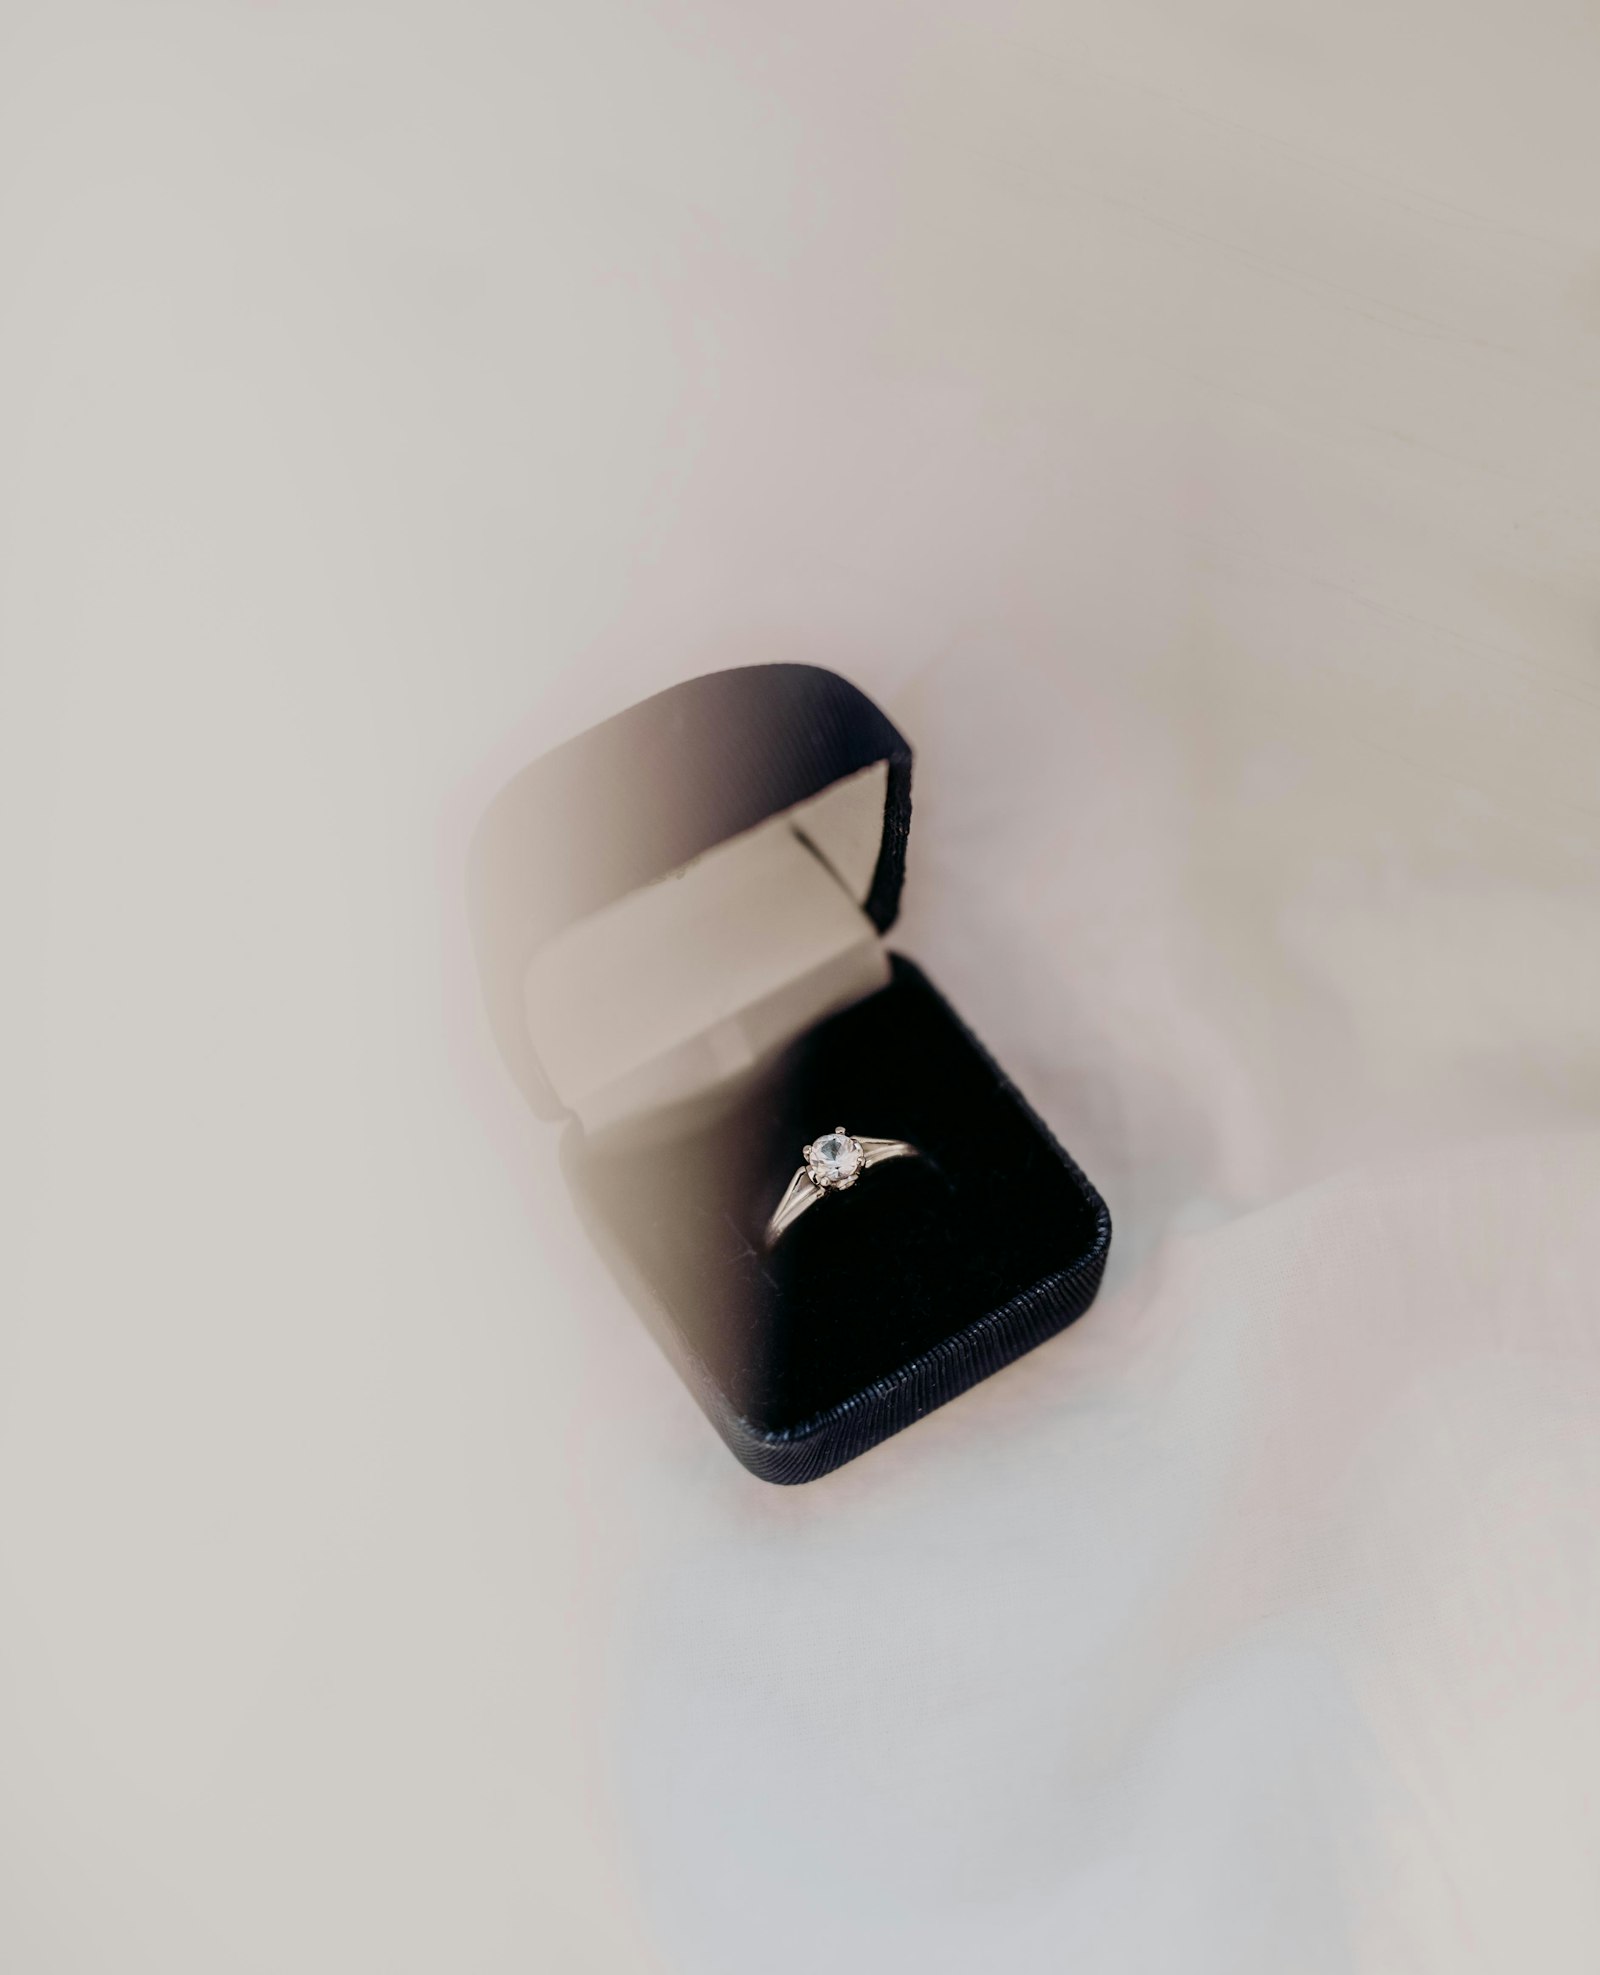 Nikon D750 + Sigma 50mm F1.4 DG HSM Art sample photo. Silver engagement ring on photography